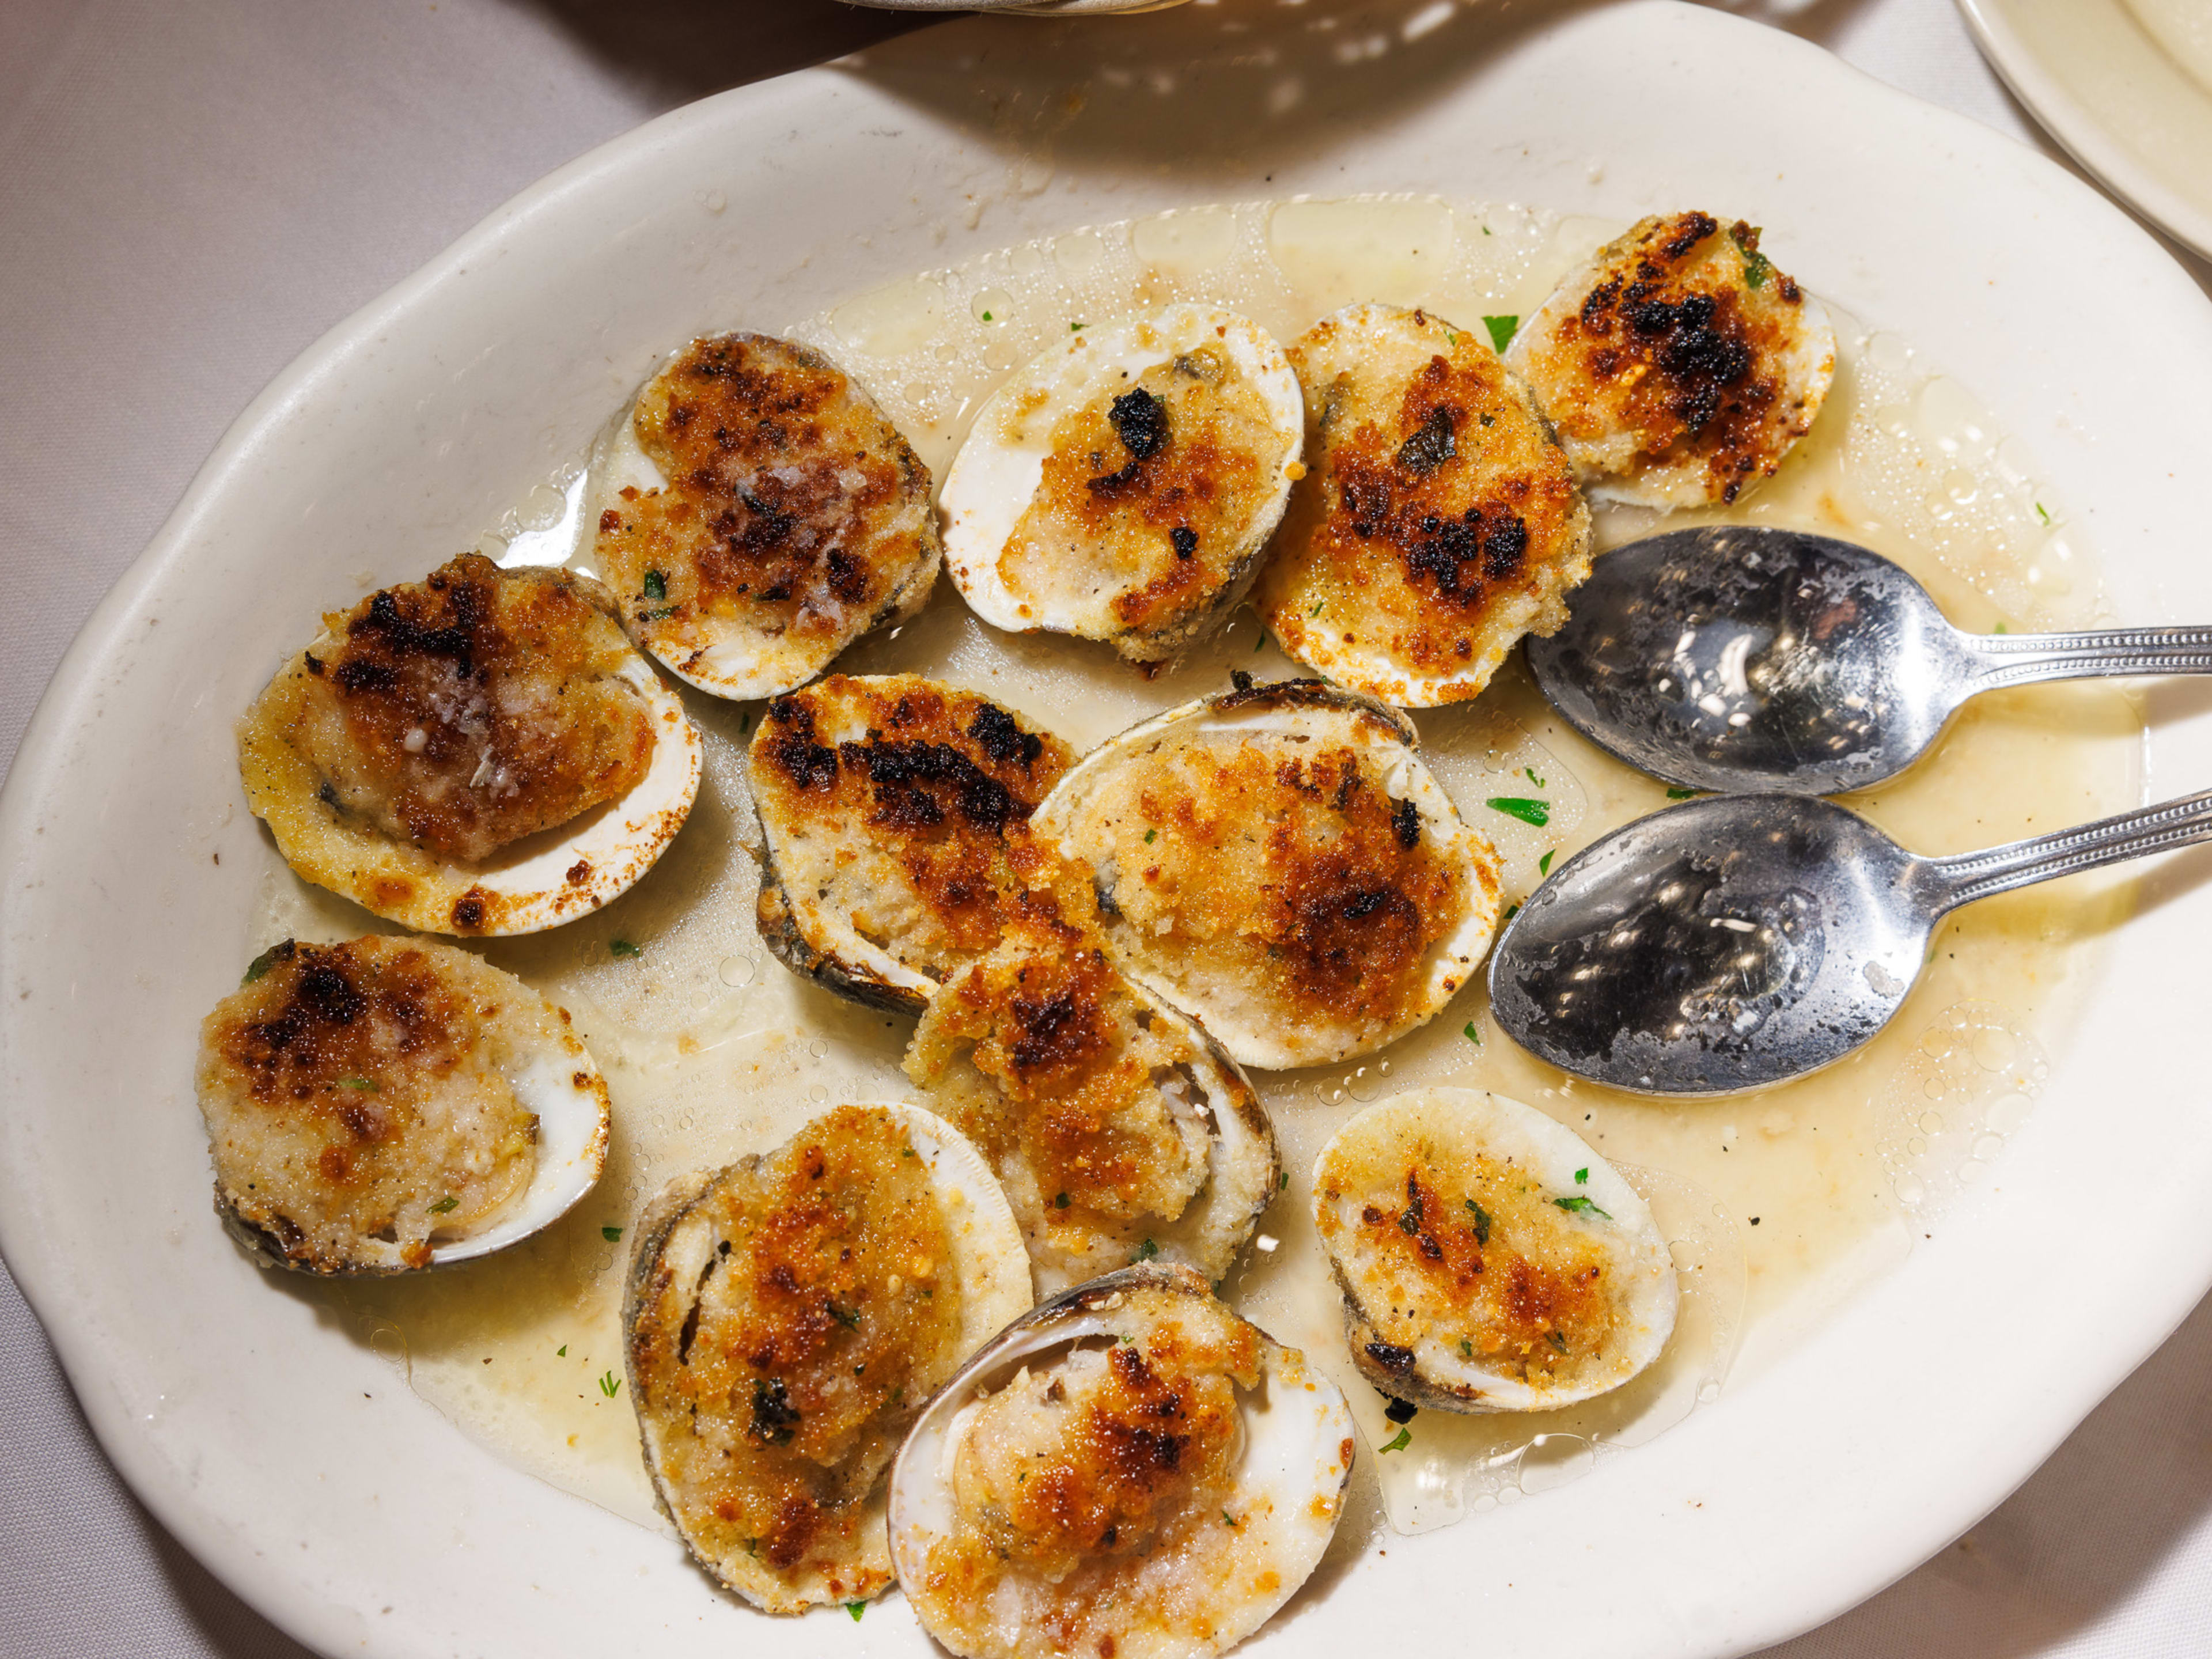 The baked clams at Don Peppe.